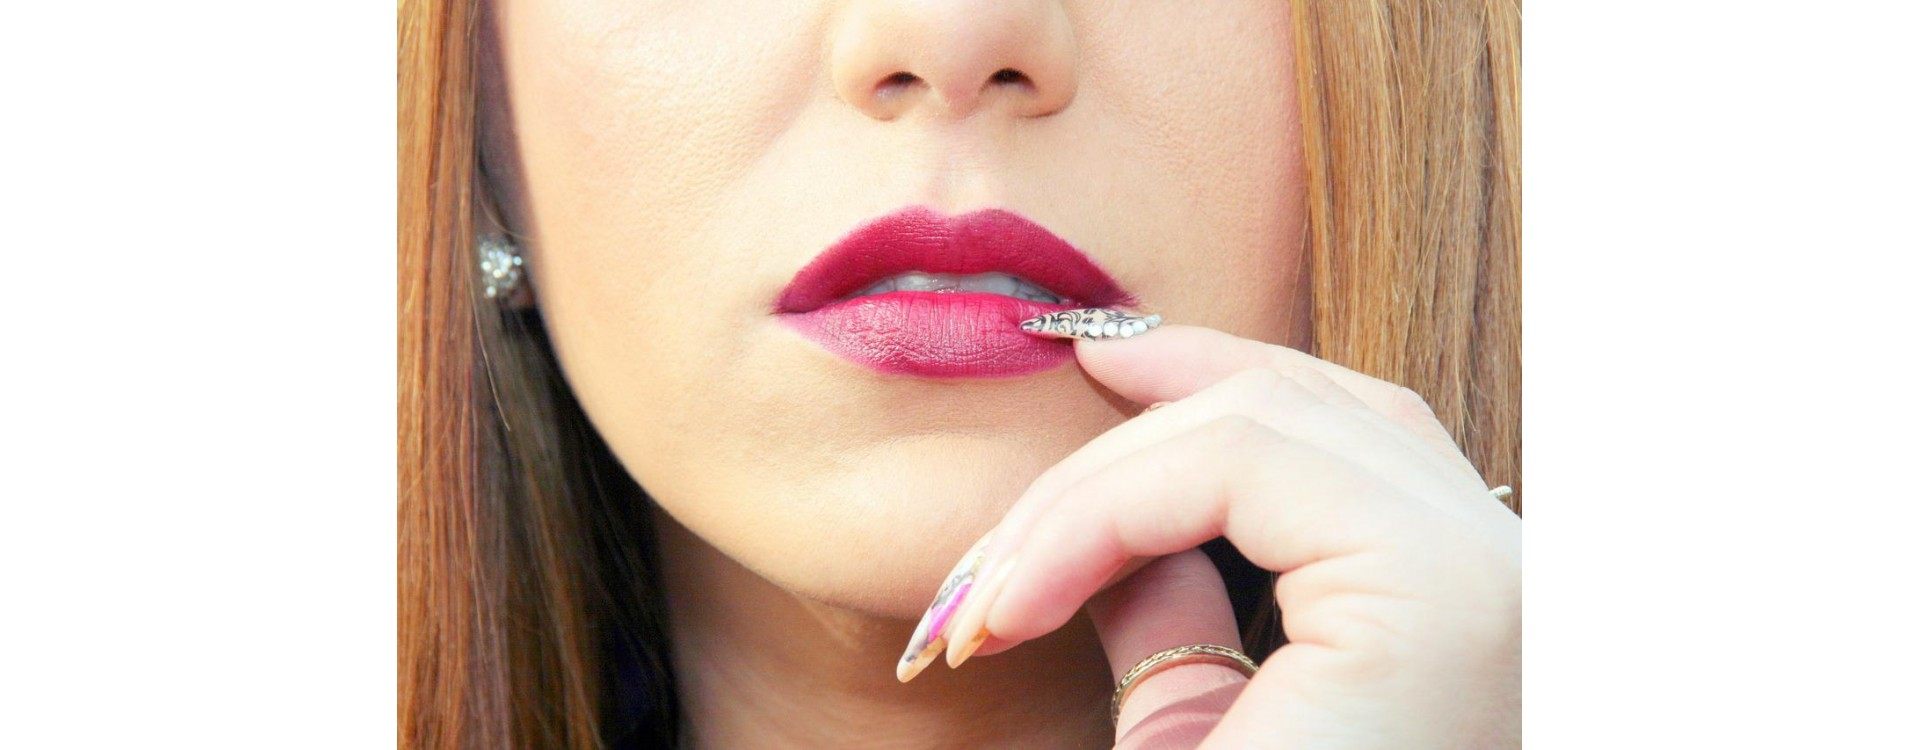 Our tips for becoming a lipstick professional